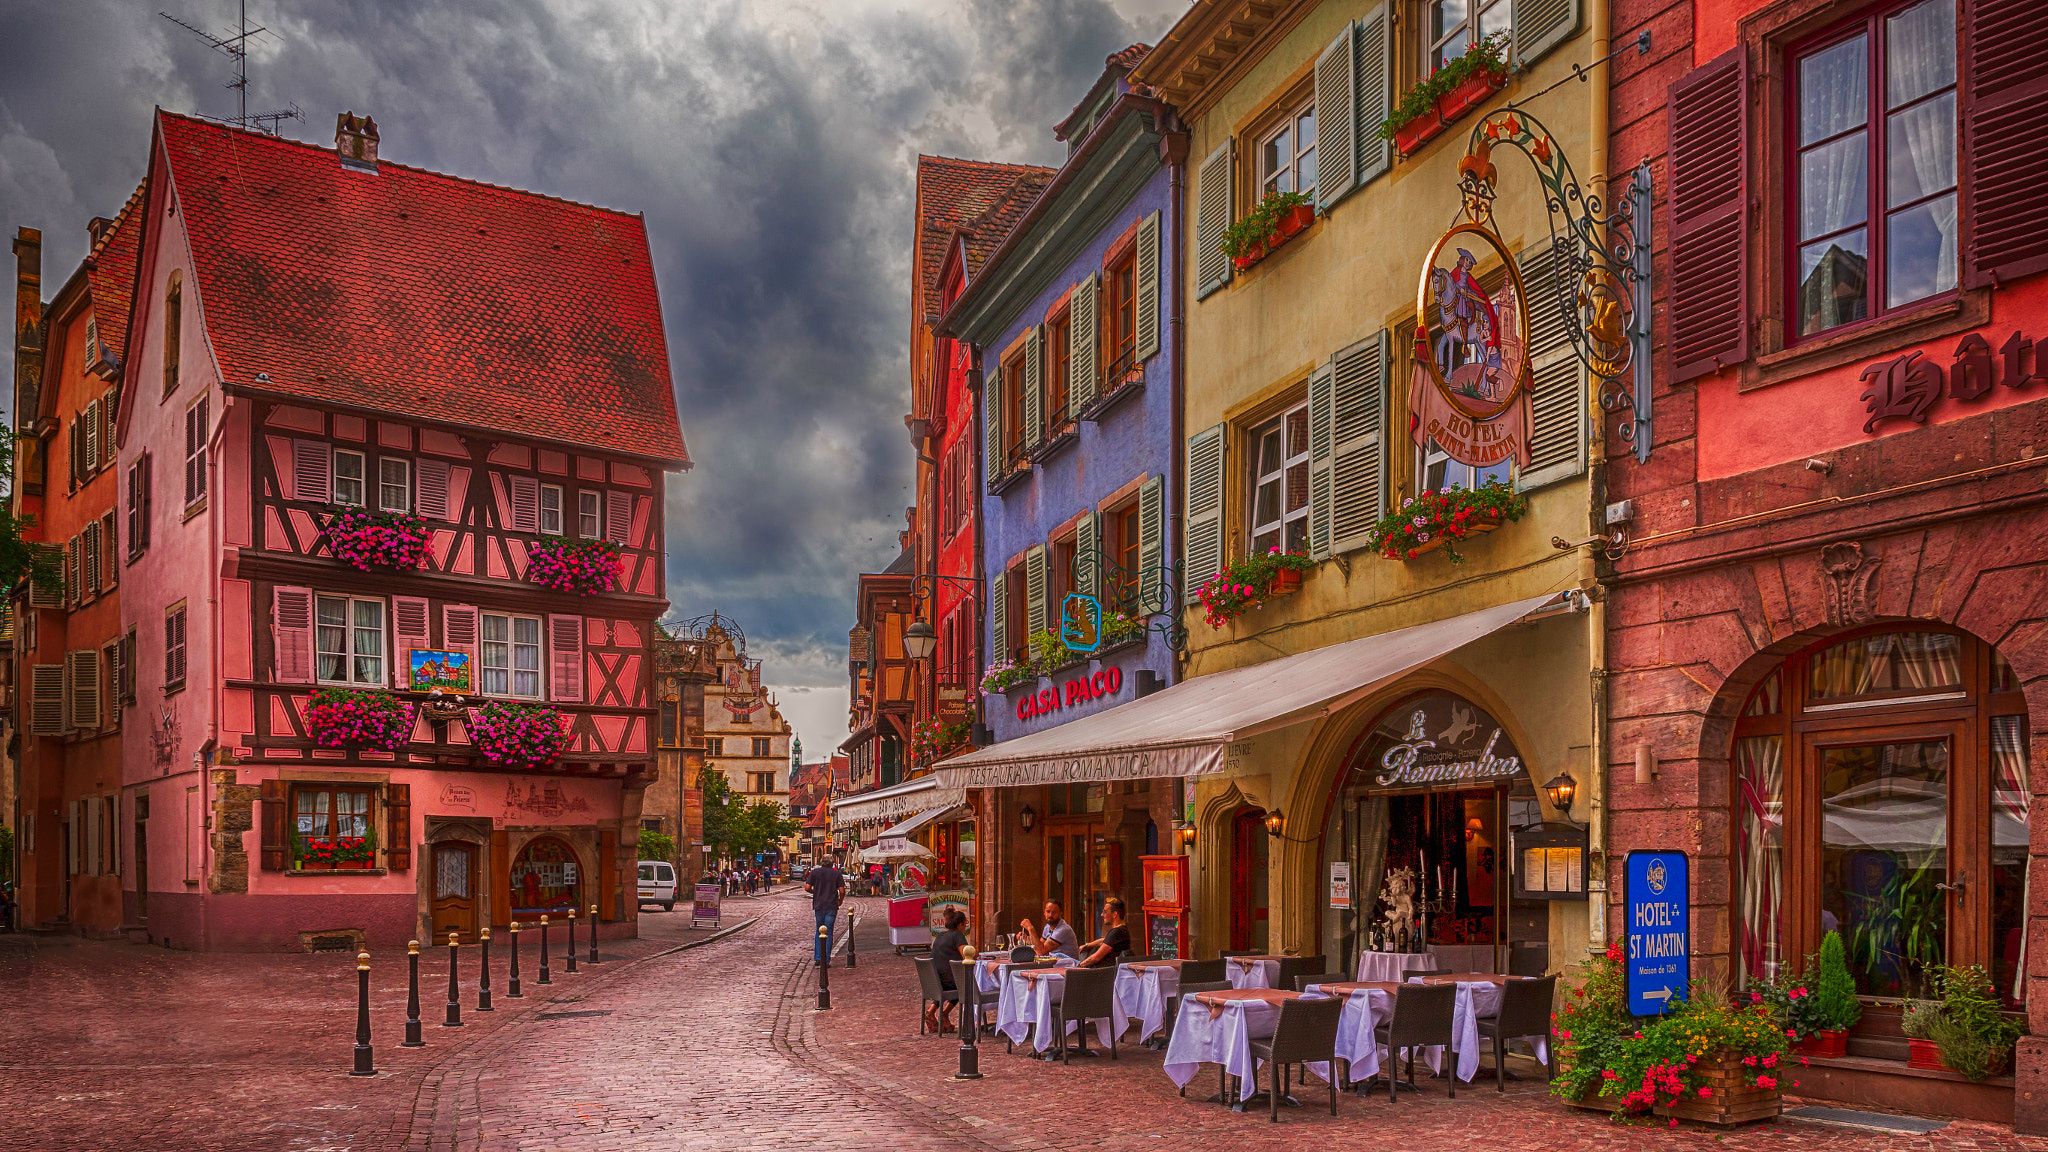 Wallpaper. Cities. photo. picture. France, Alsace, the city